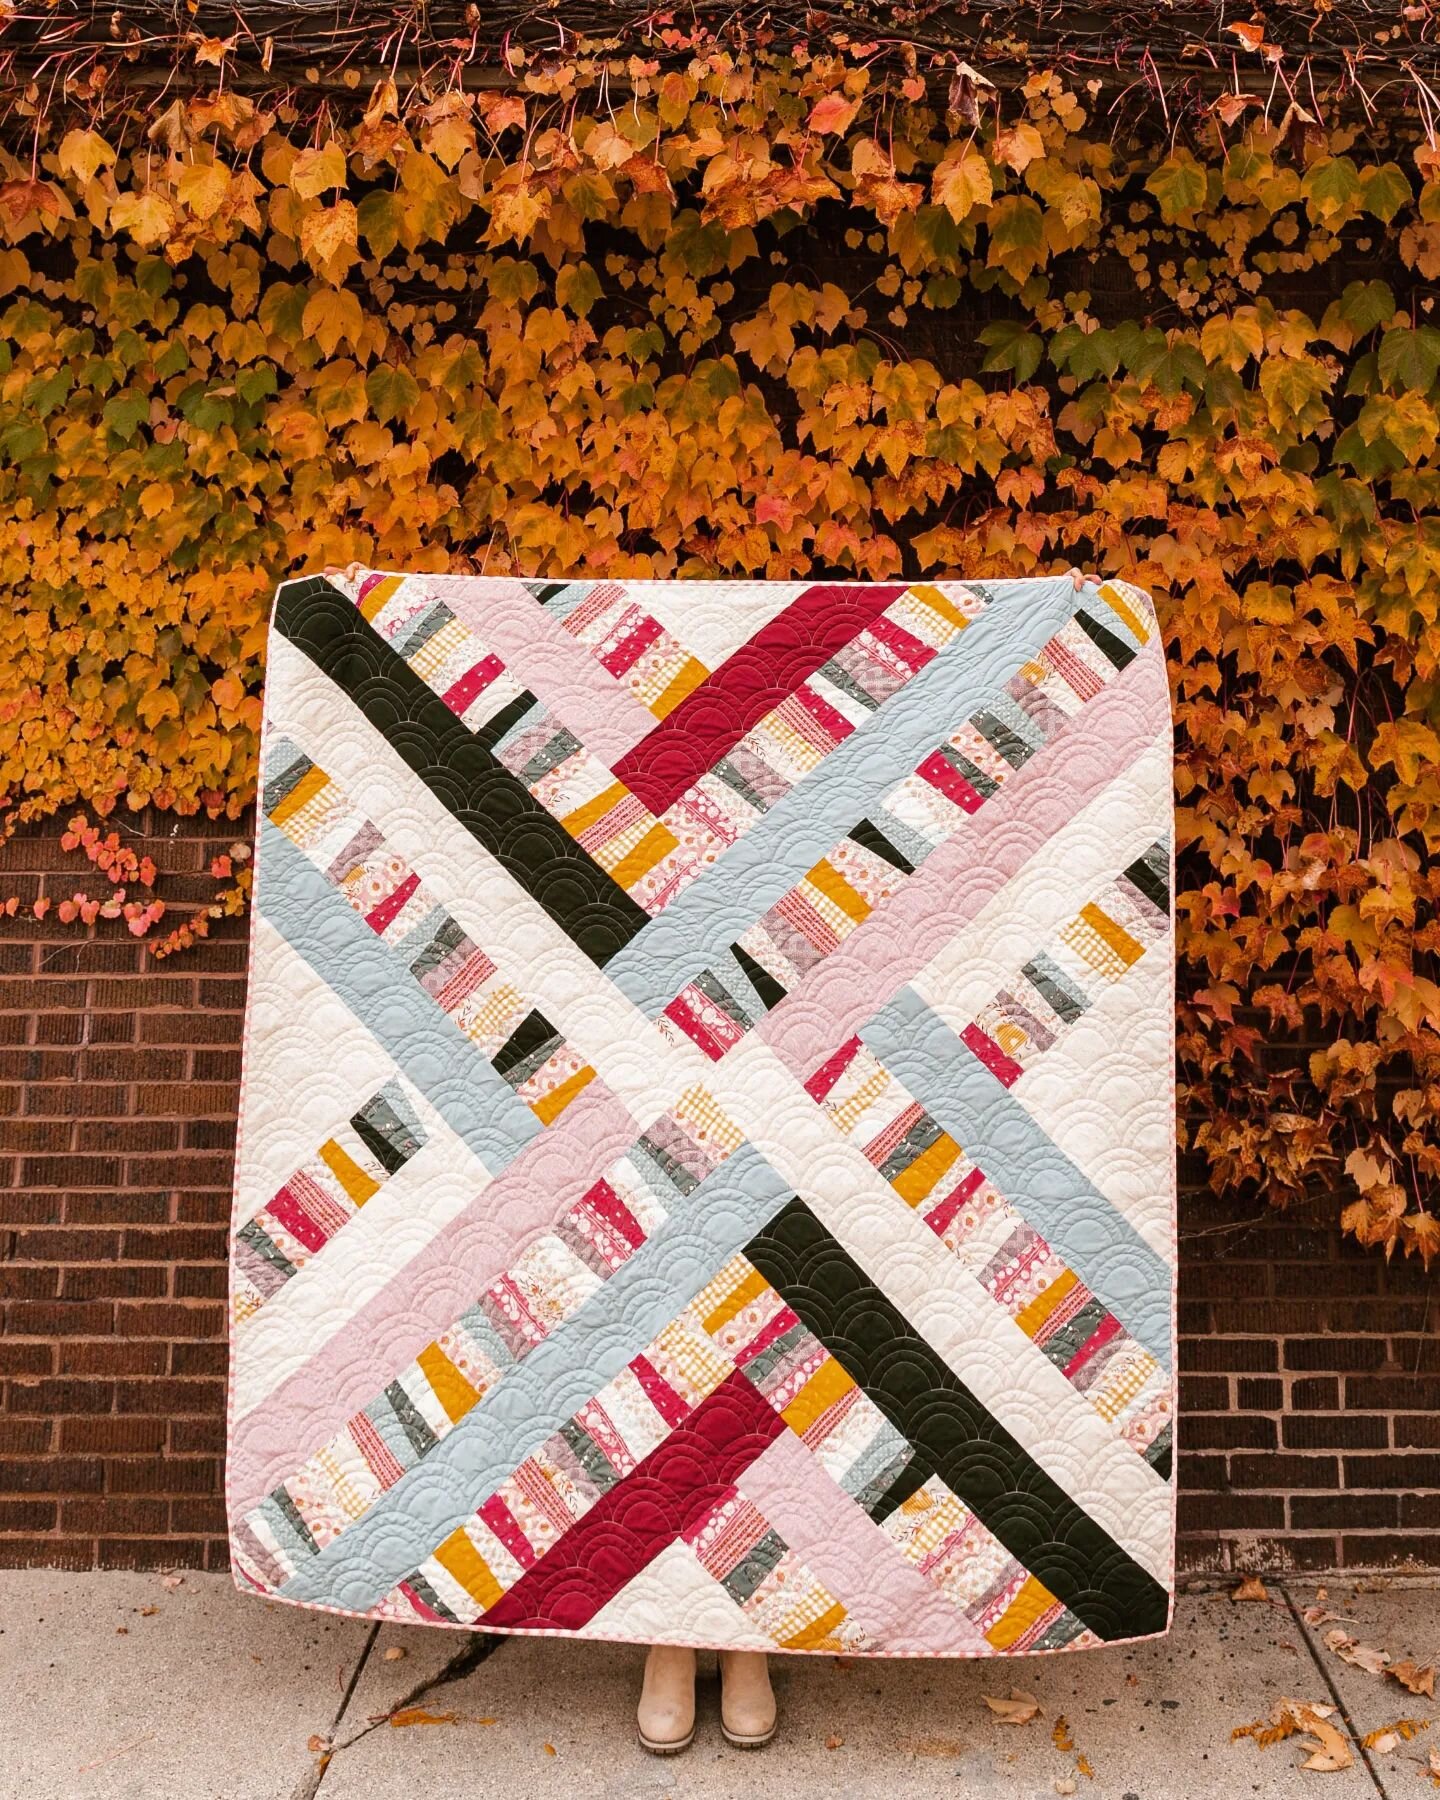 Are you a part of @suzyquilts Patterns Facebook Group? 
If you're not, there's still time to join and win this throw size #garlandquilt kit from me!

There are also other kits from @lambandloomfabrics 
@global_fiber 
@piperautumnfabrics 

All you hav